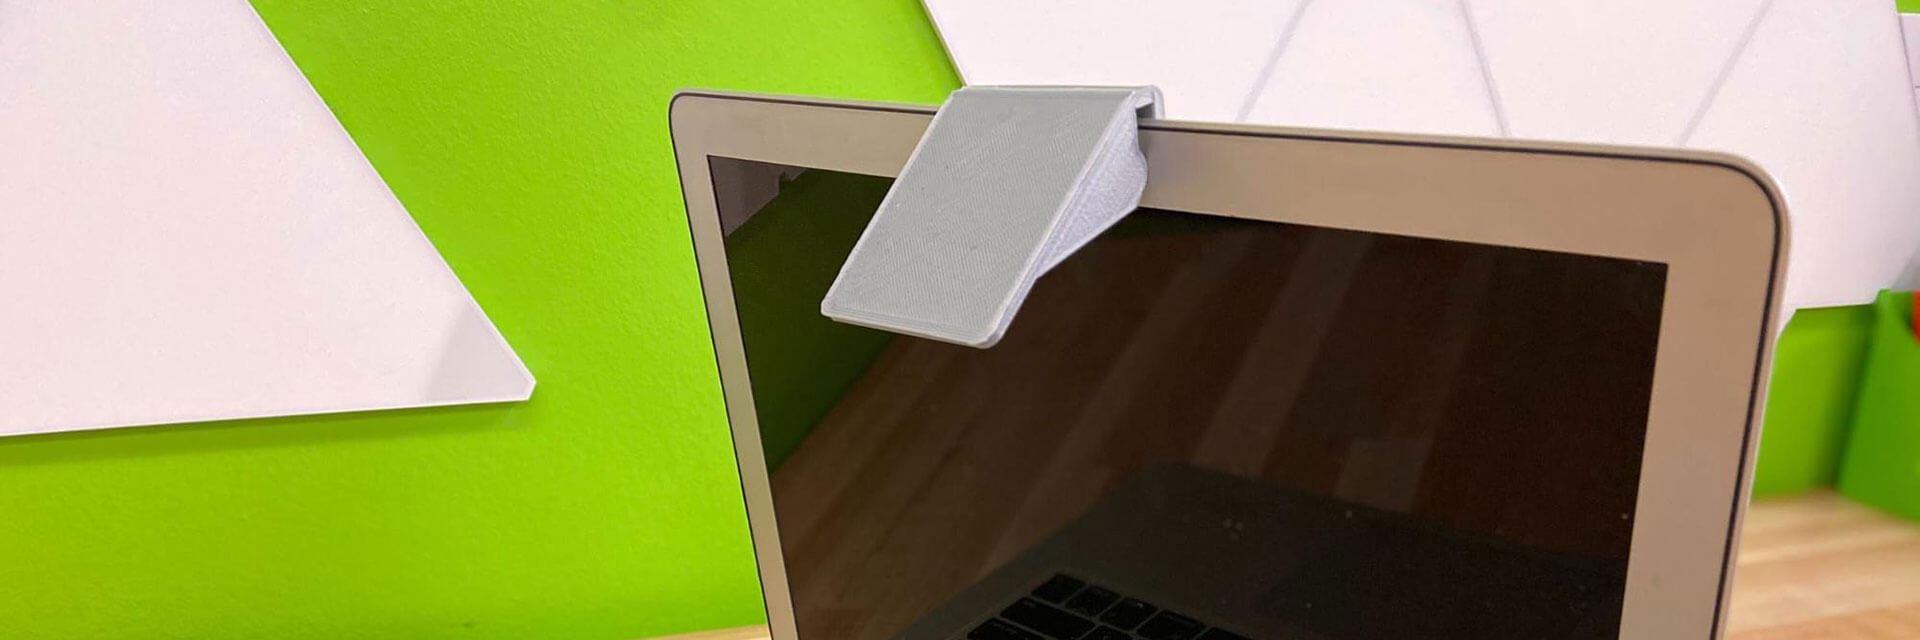 A 3D printed document cam on a Macbook